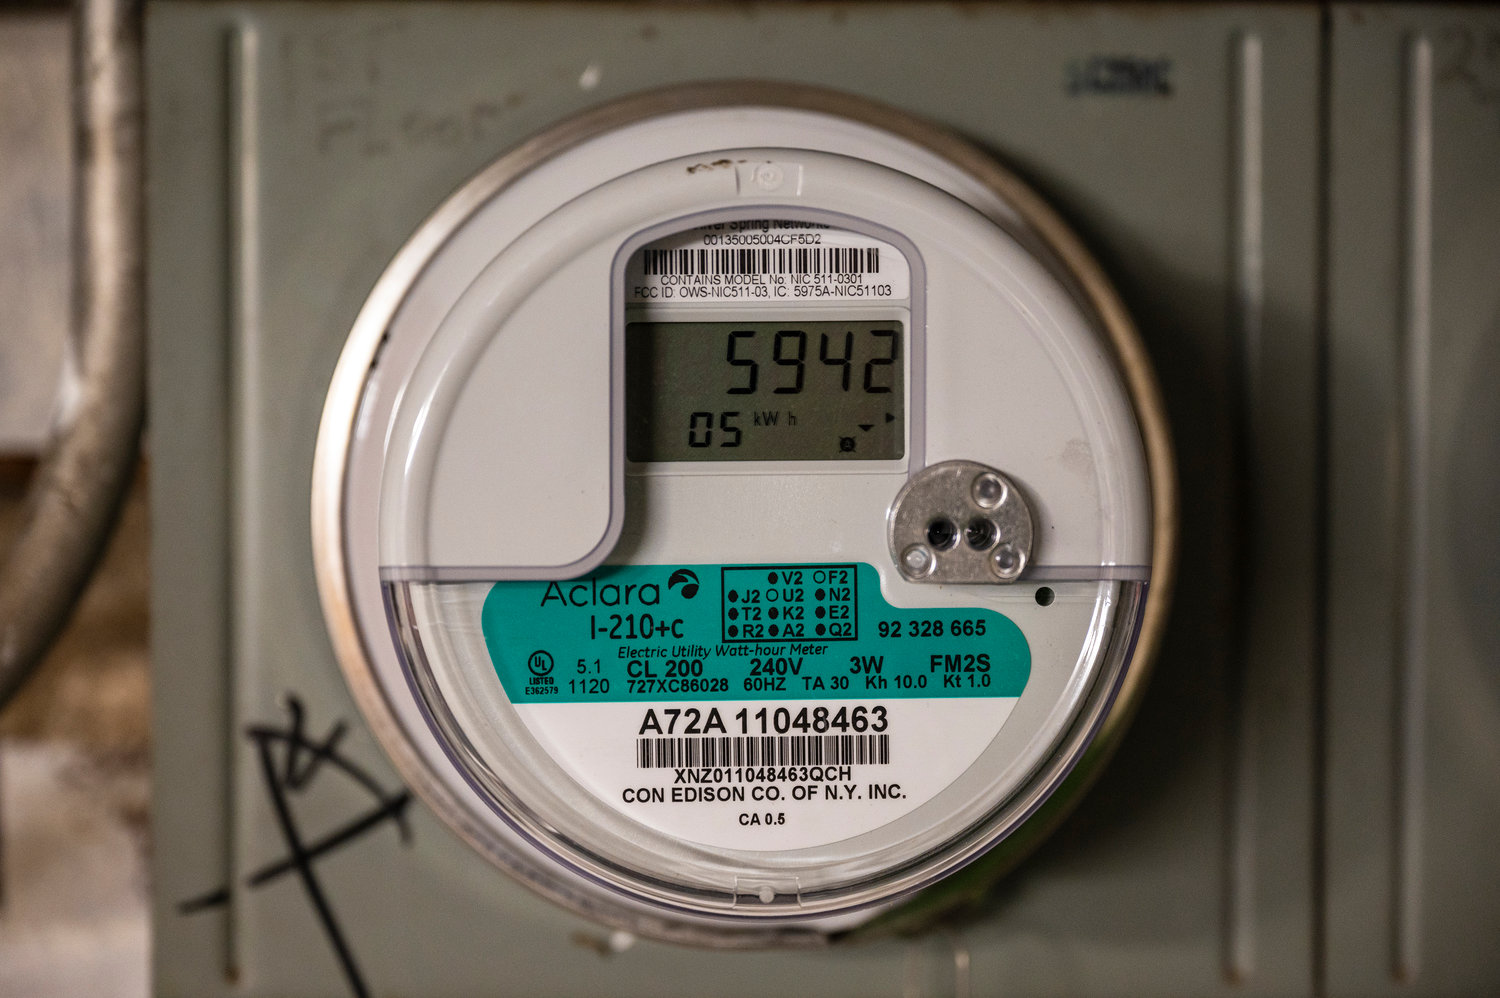 Con Edison notified many customers last year their traditional power meters will be replaced with smart meters, offering more accurate readings that wouldn’t necessarily require a physical visit from meter readers. But when a ConEd reader visited one local building last month, some of the tenants there got an unwelcome surprise in their monthly bill just in time for the holidays.